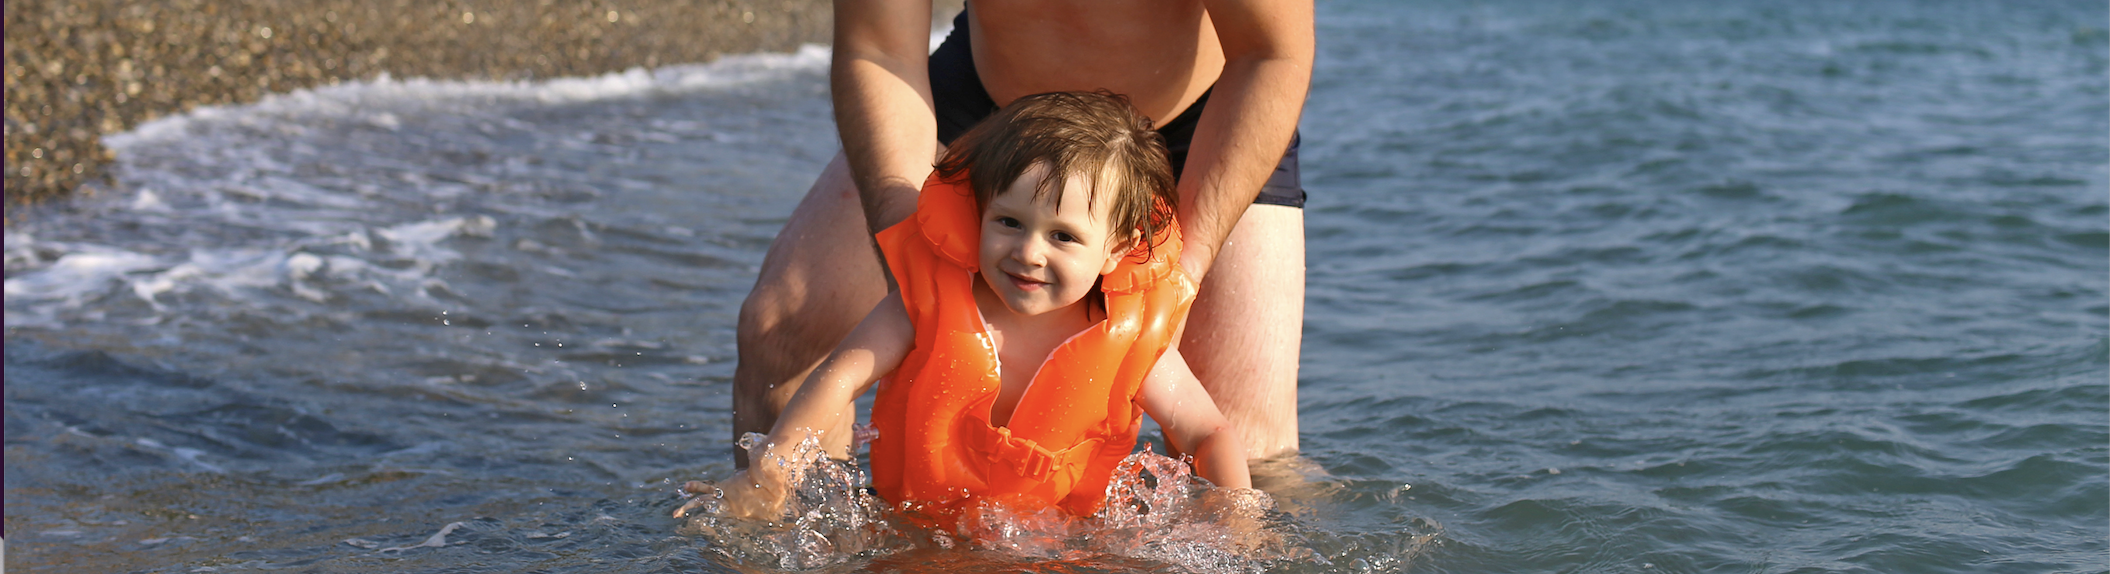 how to buy an infant life jacket guide